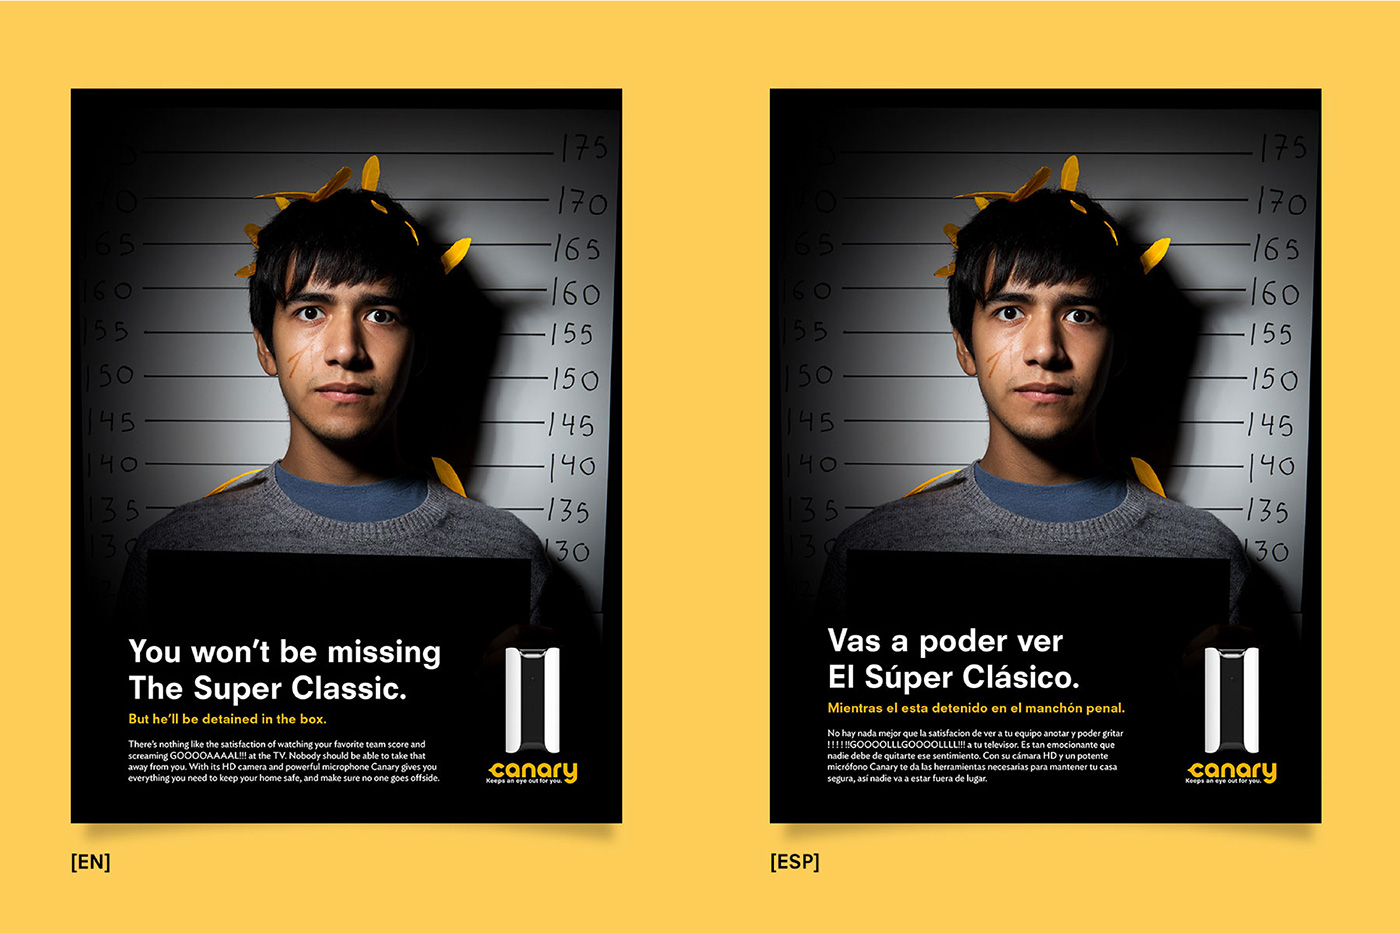 Advertising  security campaign mexico city canary